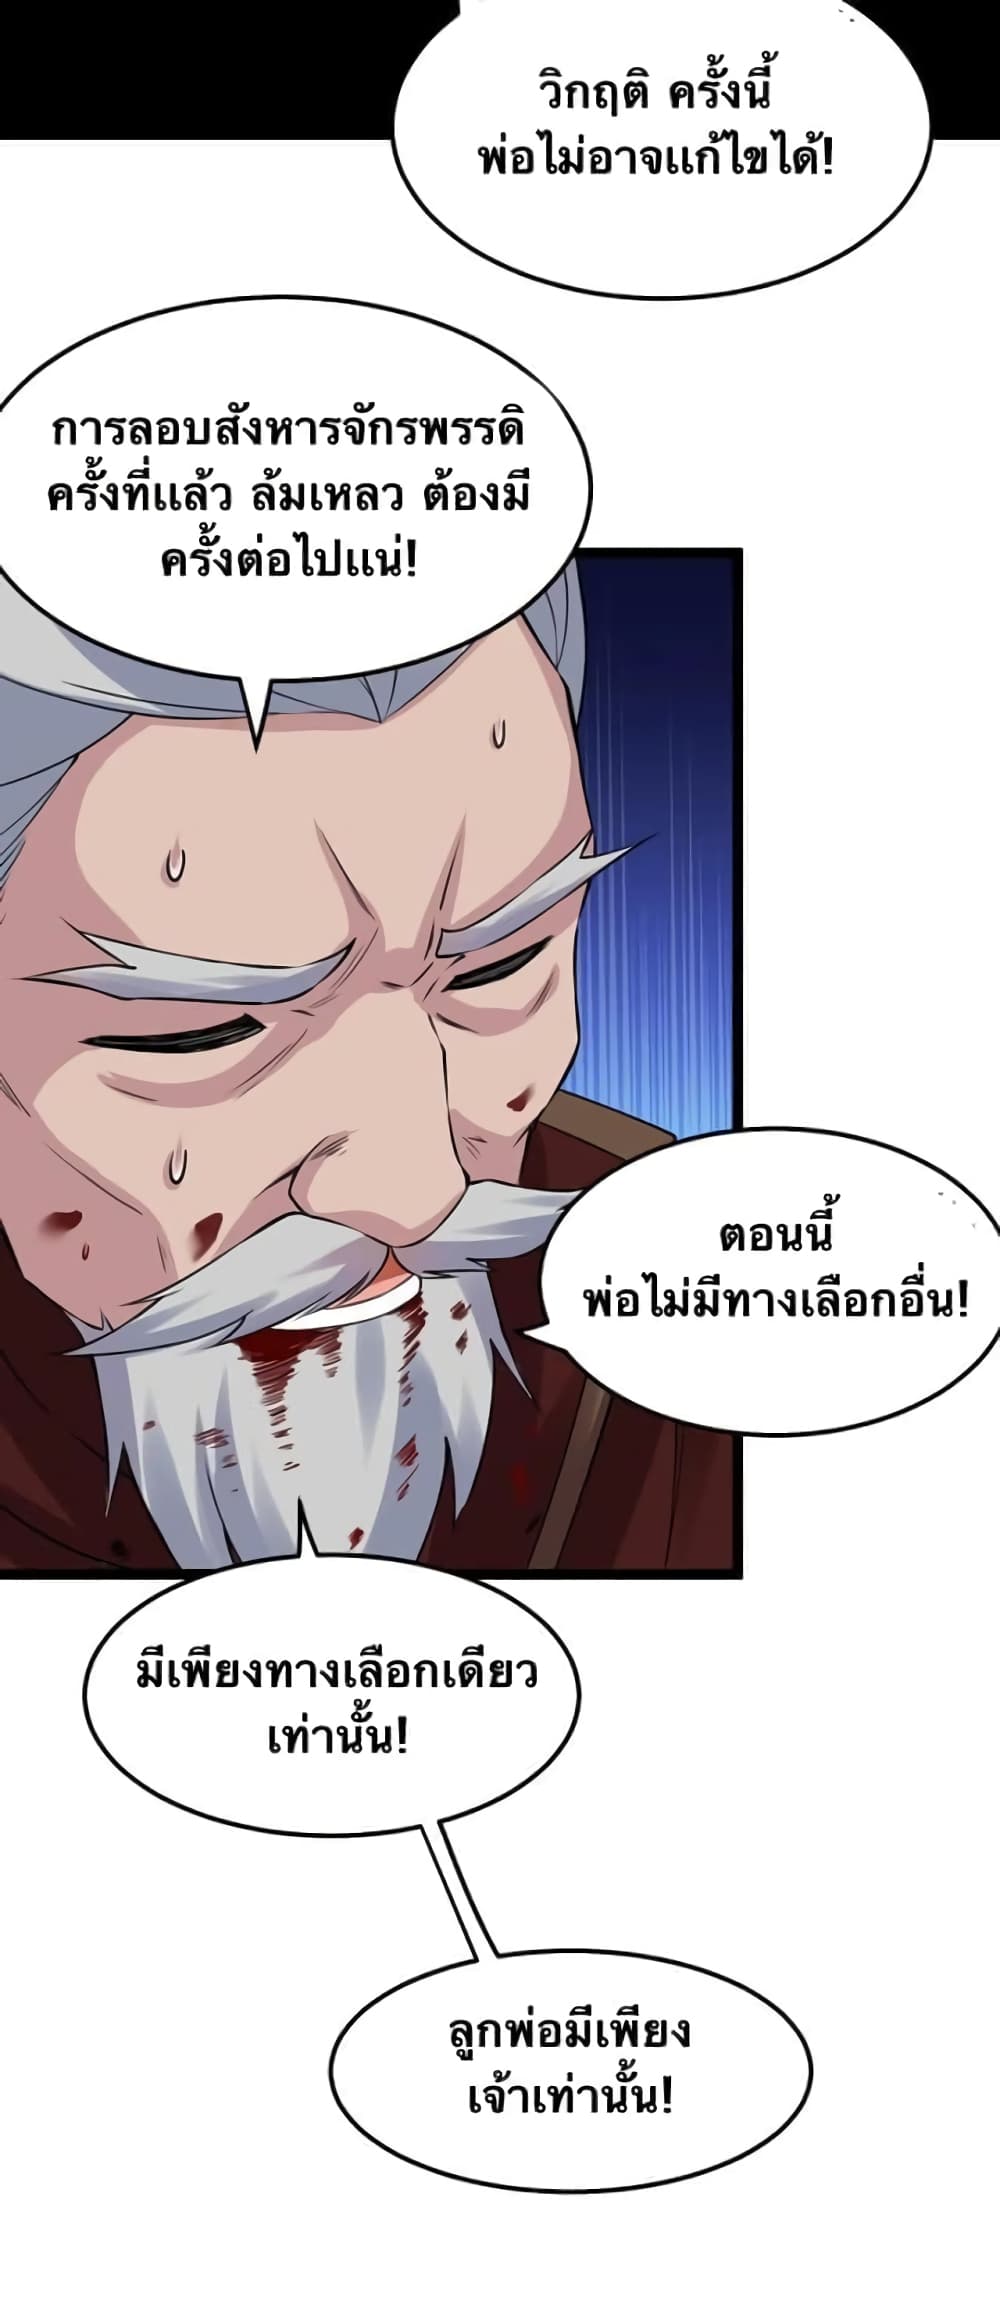 Godsian Masian from Another World ตอนที่ 99 (12)